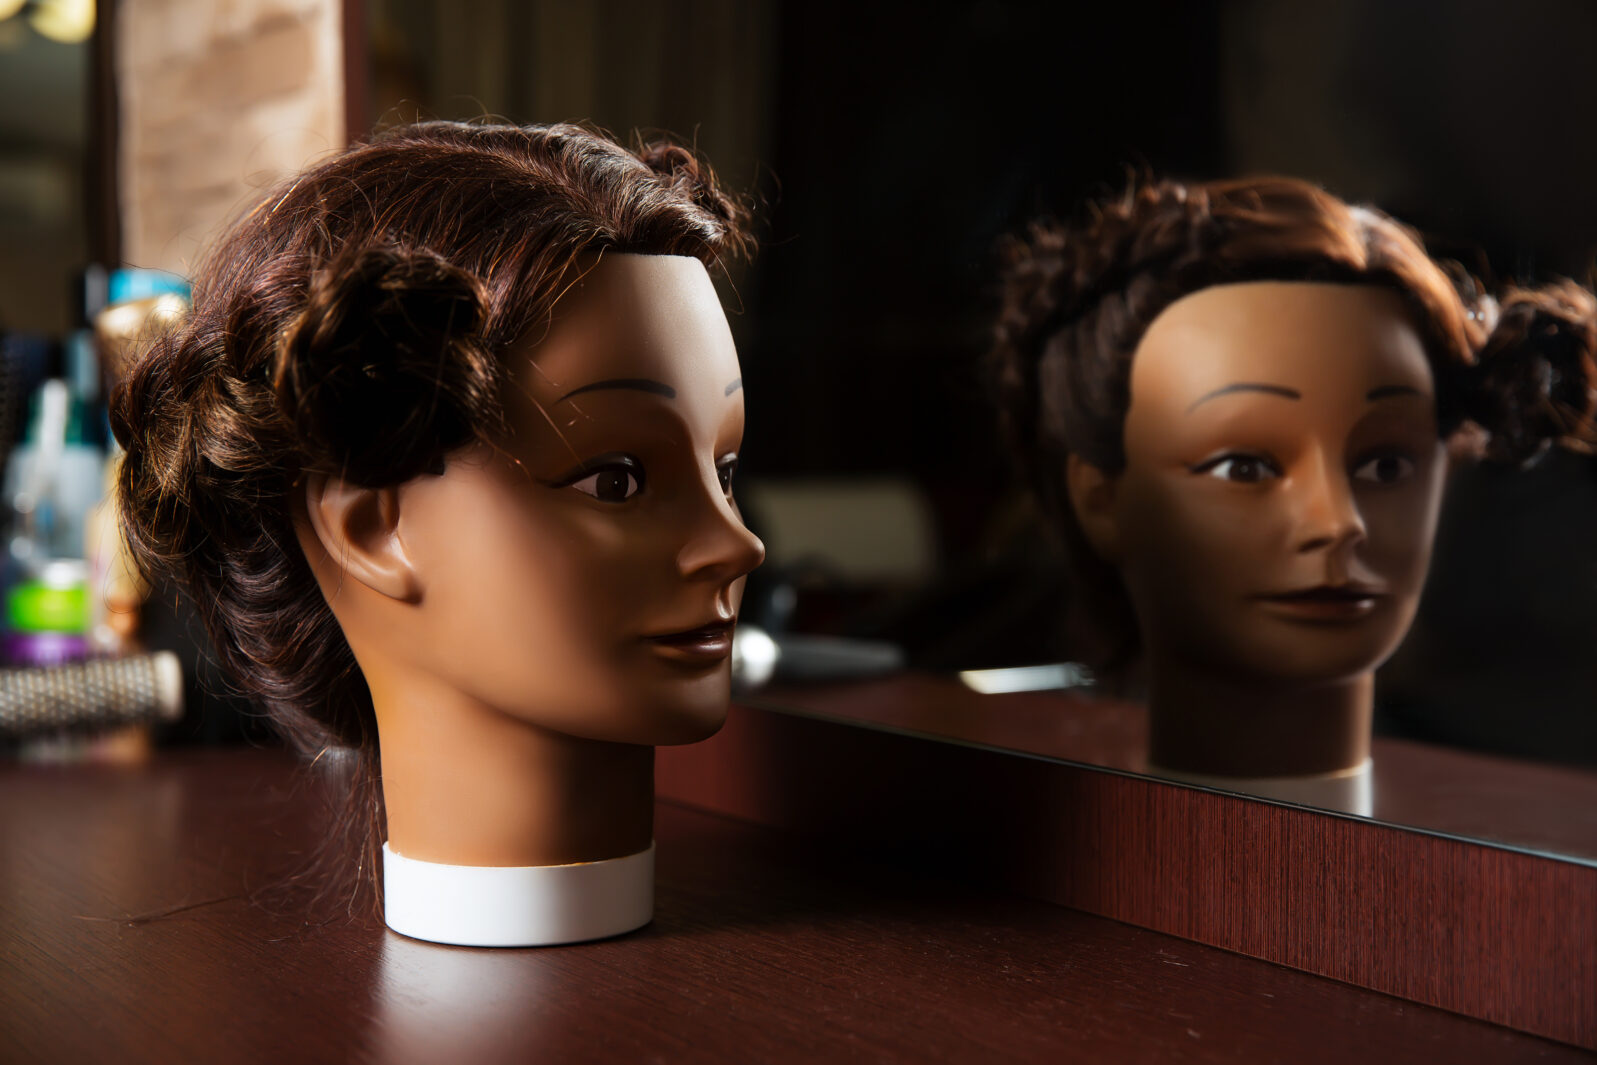 Hairdressing mannequin located on a wooden table.